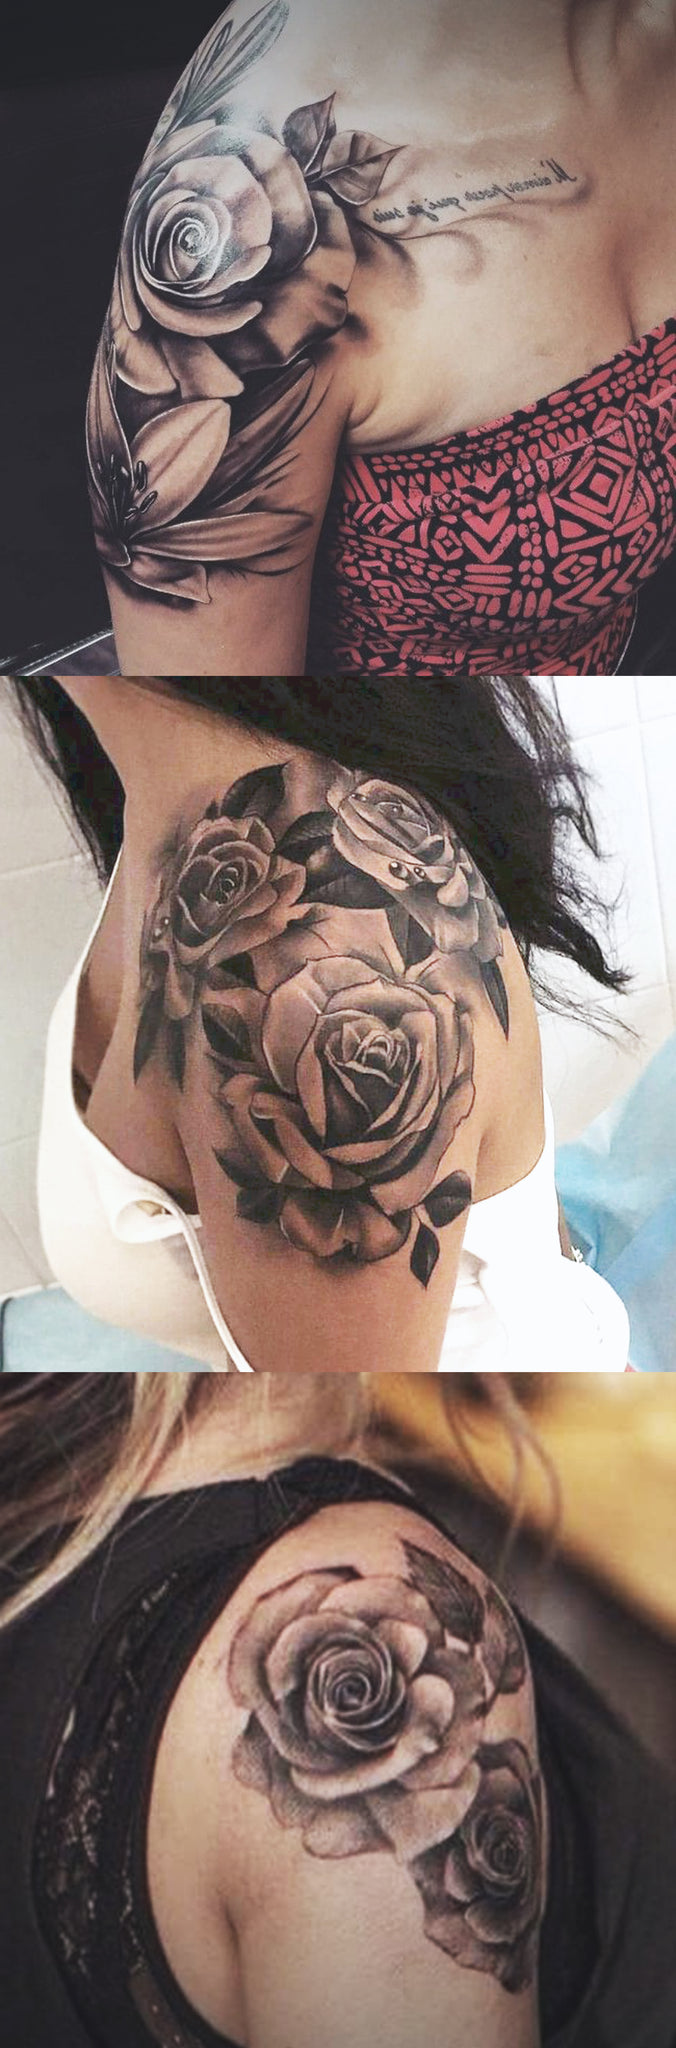 30 of the Most Popular Shoulder  Tattoo  Ideas for Women 